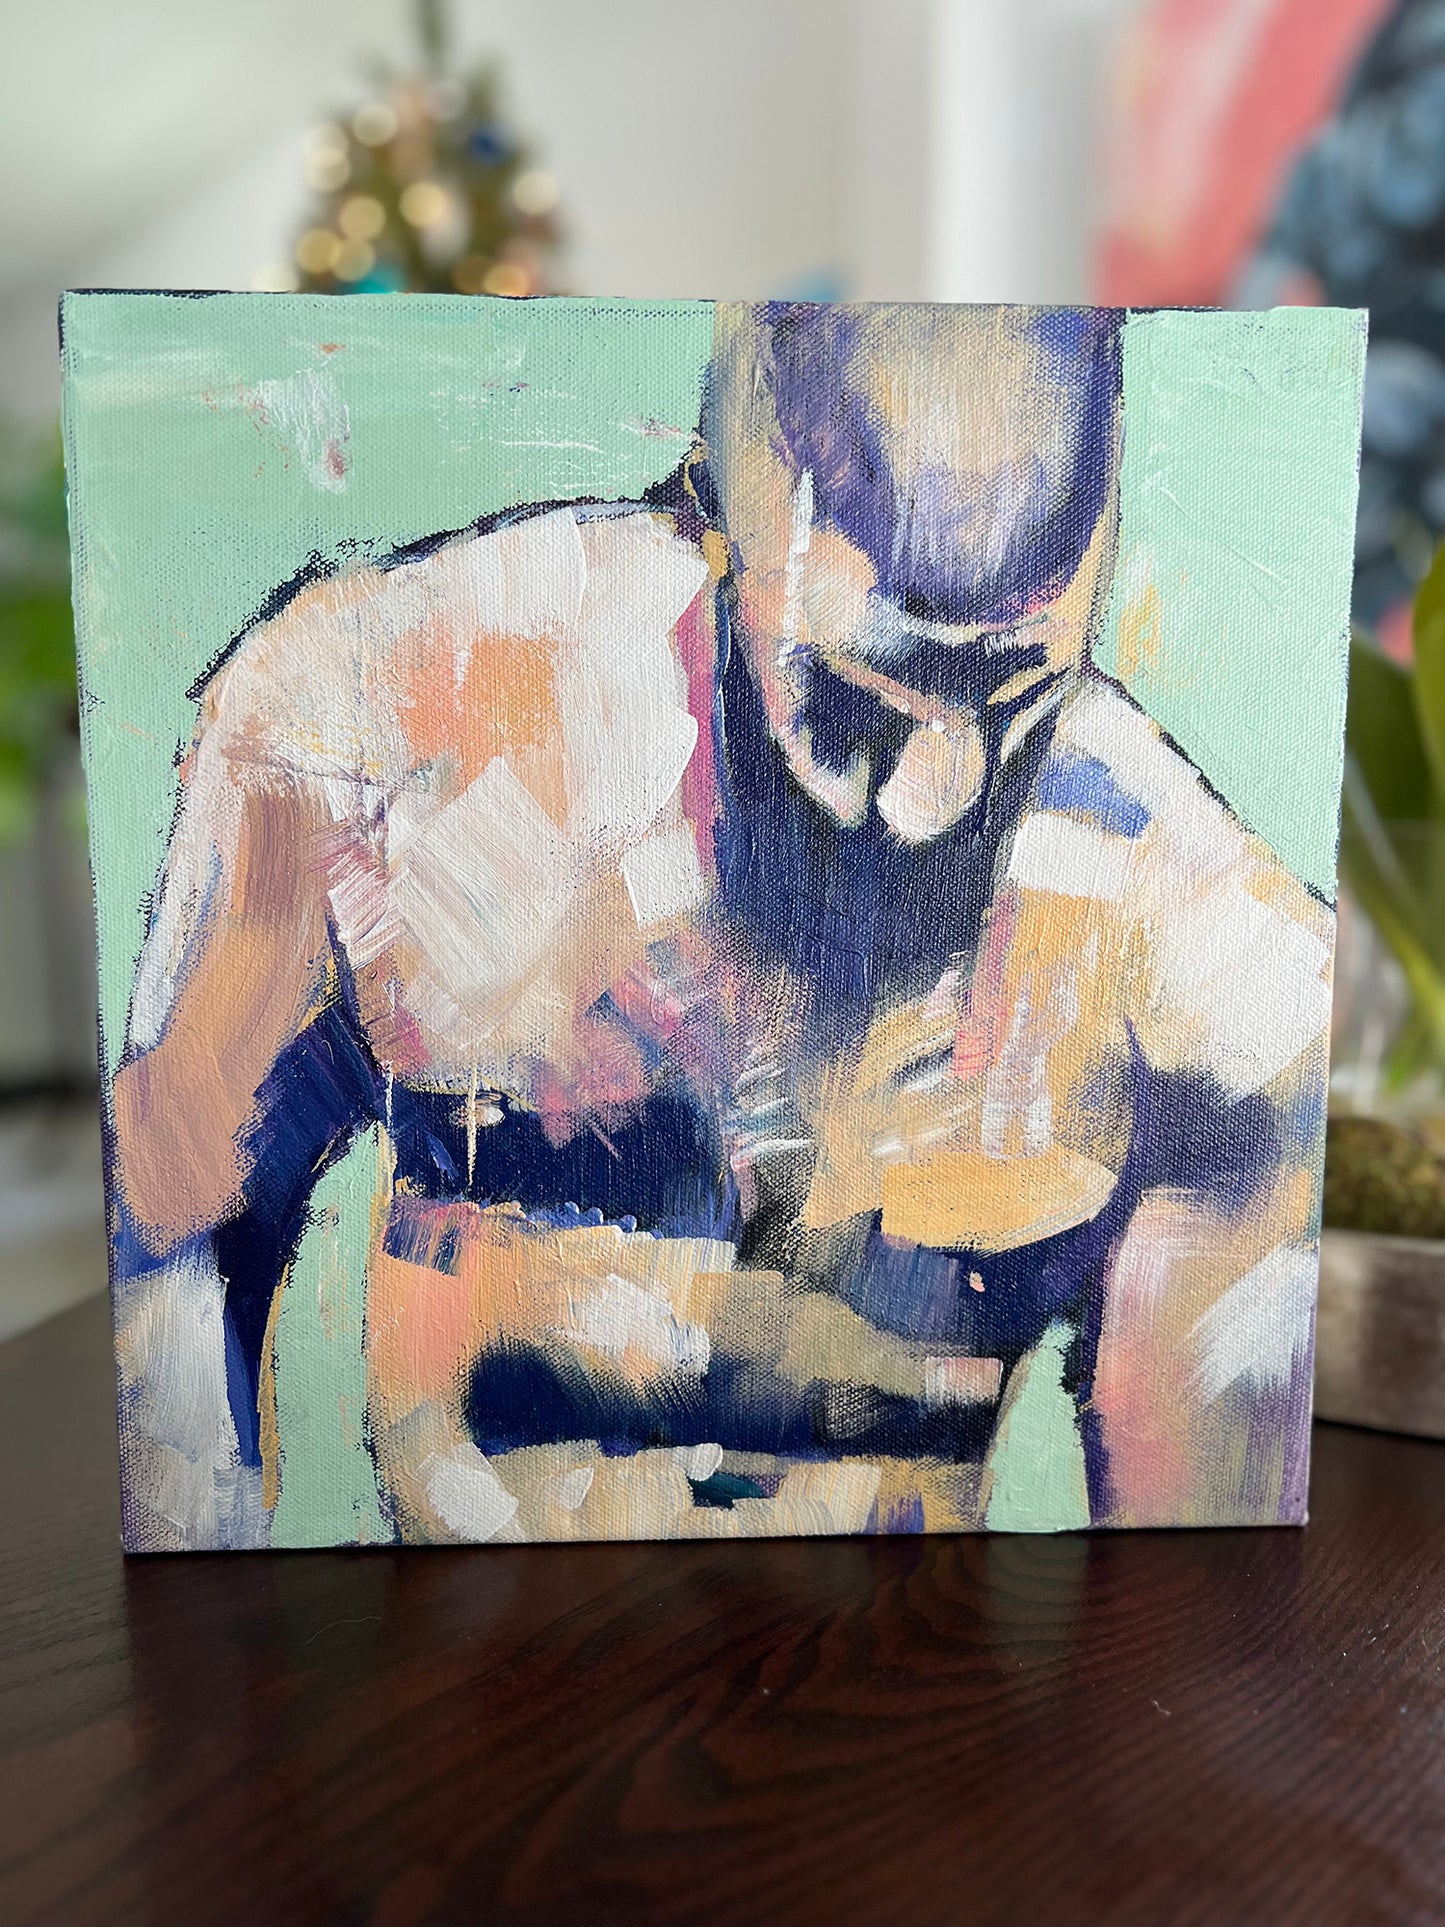 Strong Wet Bearded Hunk with Hairy Chest, 12" x 12" - Original Acrylic Painting